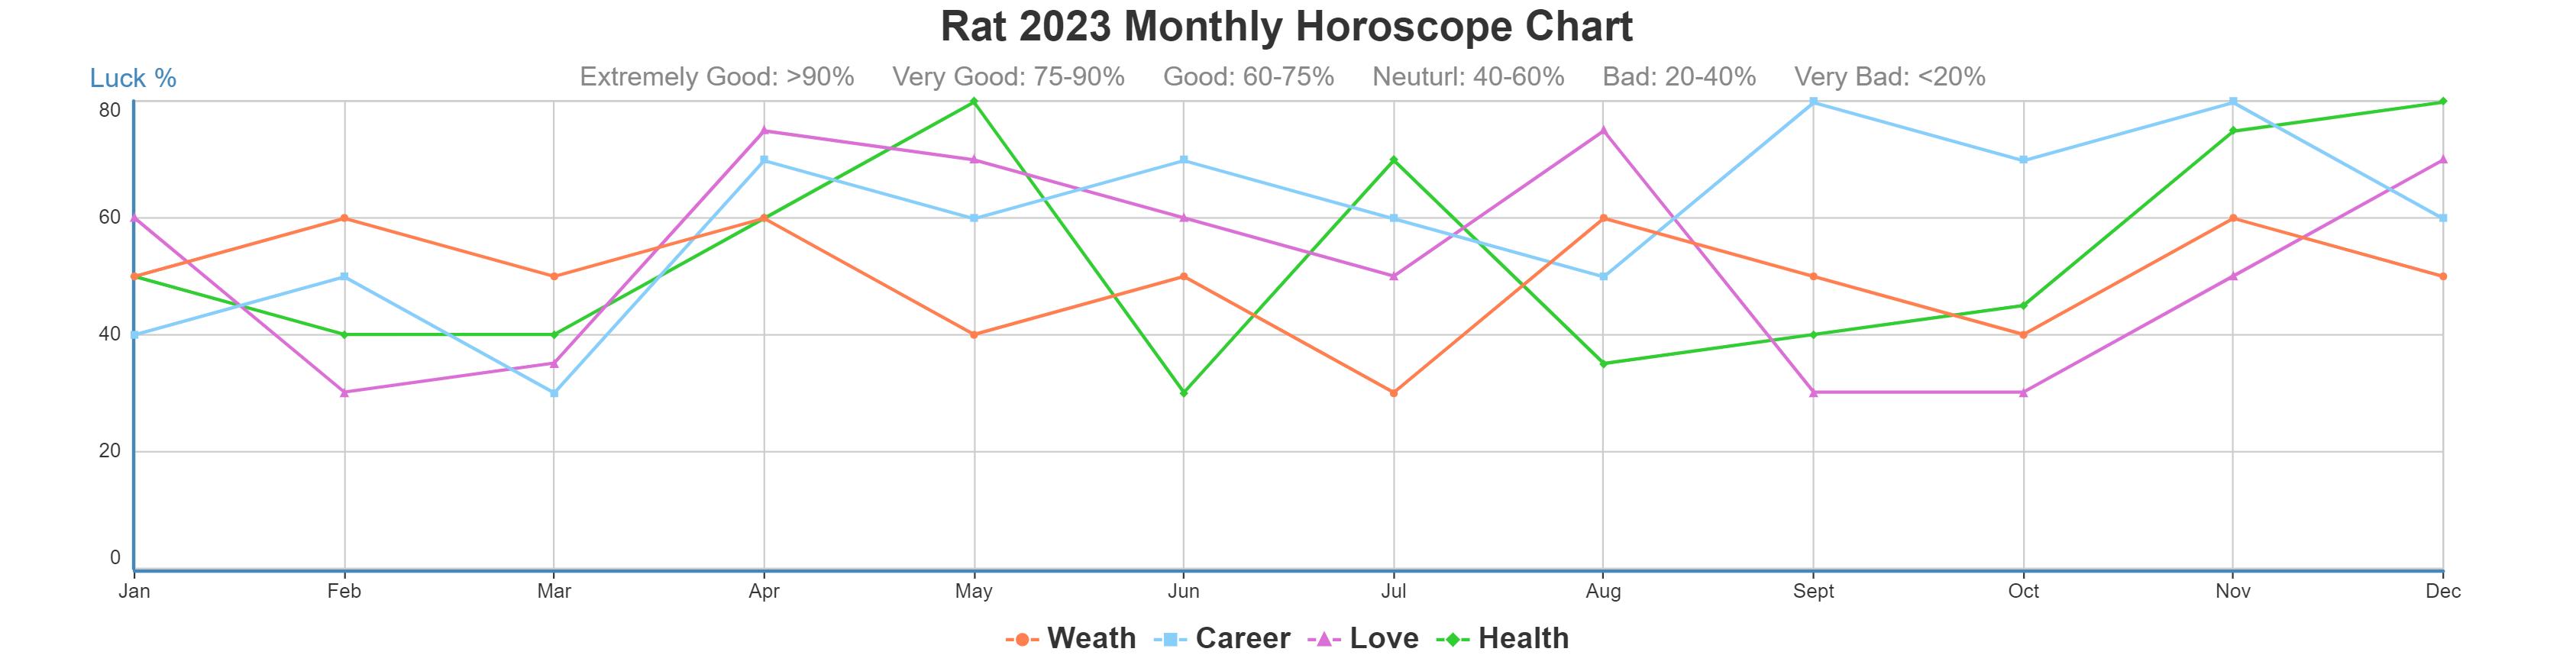 Chinese Horoscope for Rat/Mouse, 2023/2024 Yearly and Monthly Horoscope